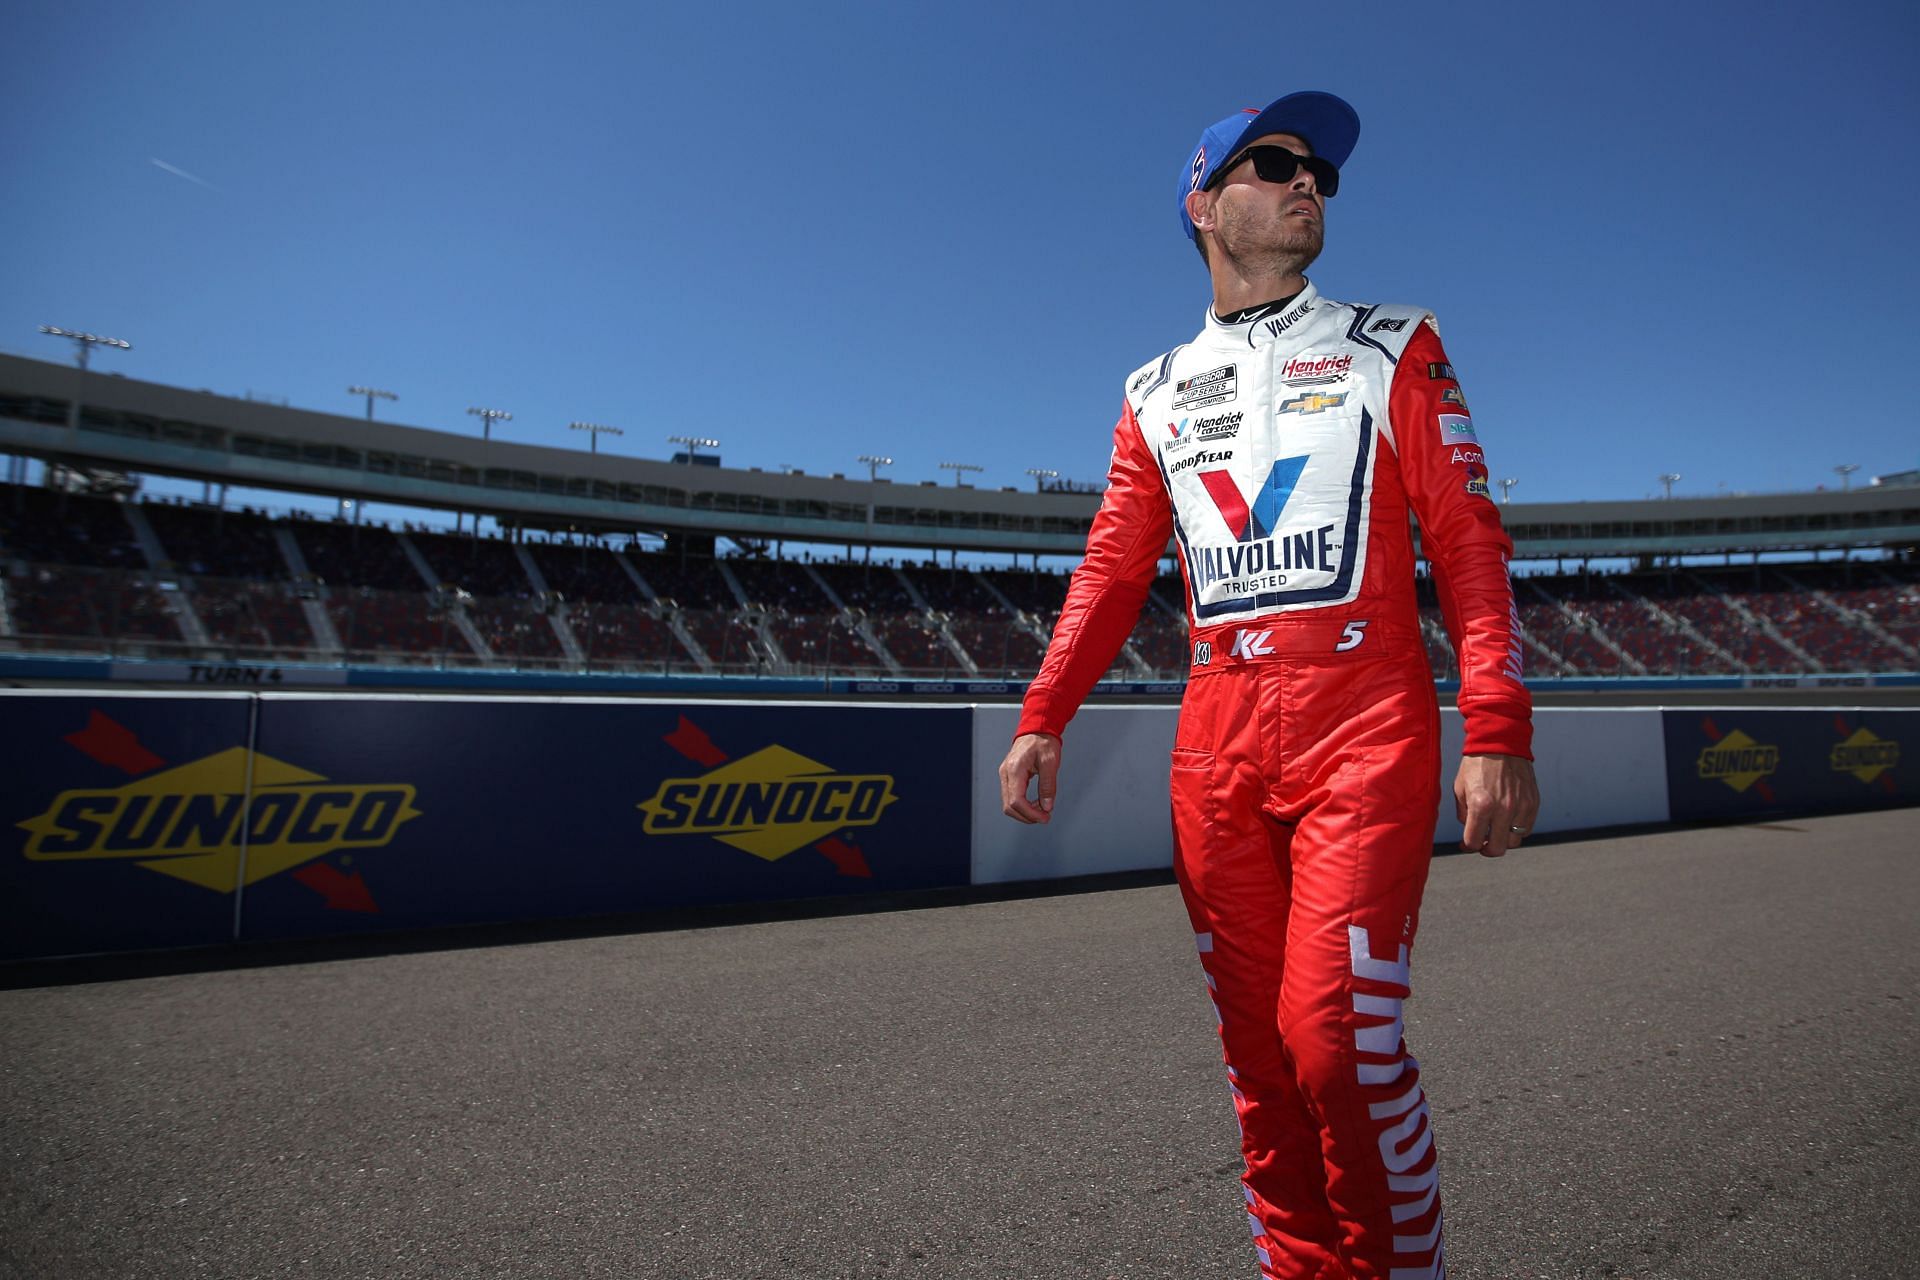 Kyle Larson walks the grid during qualifying for the Ruoff Mortgage 500 at Phoenix Raceway.